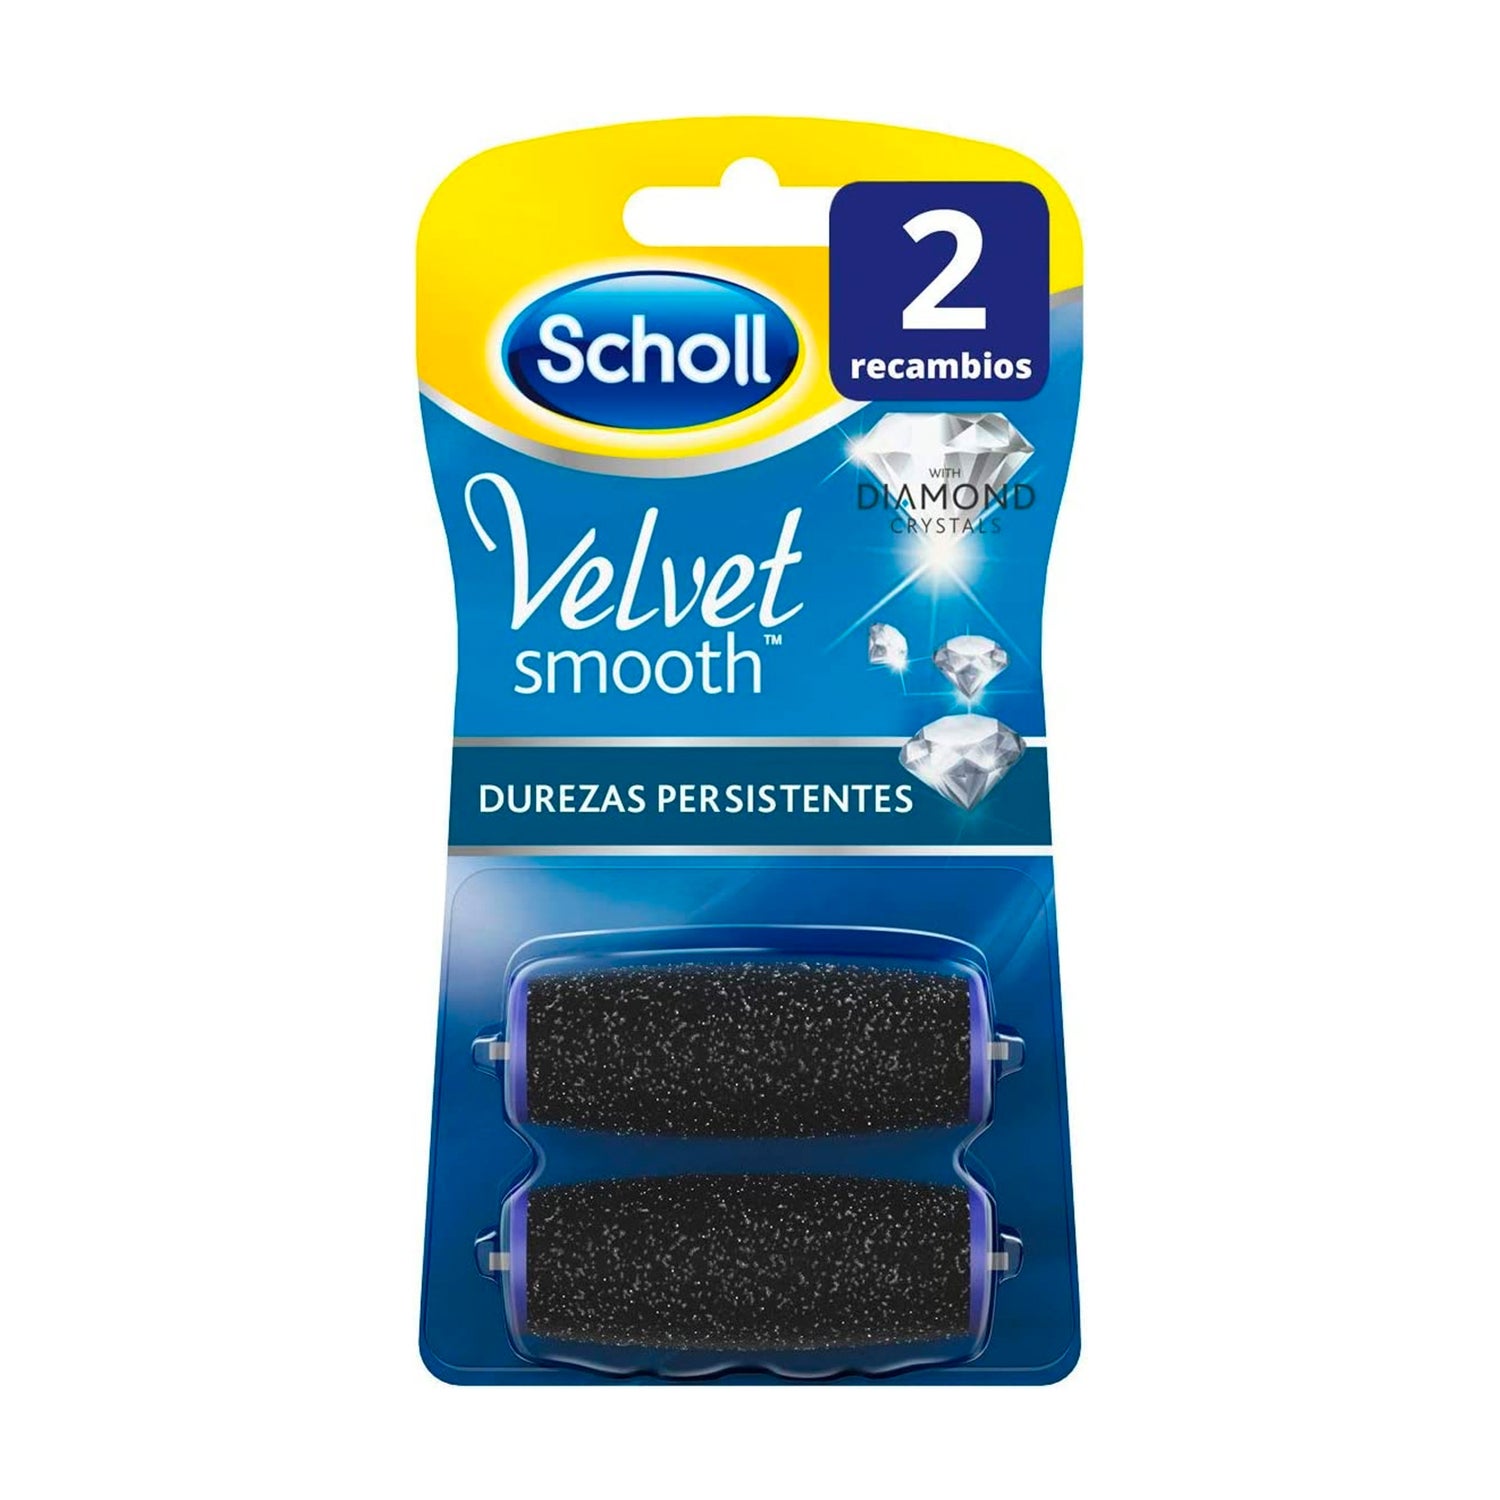 Woolworths - Scholl Velvet Smooth Electronic Nail Care System now in  stores! | Facebook